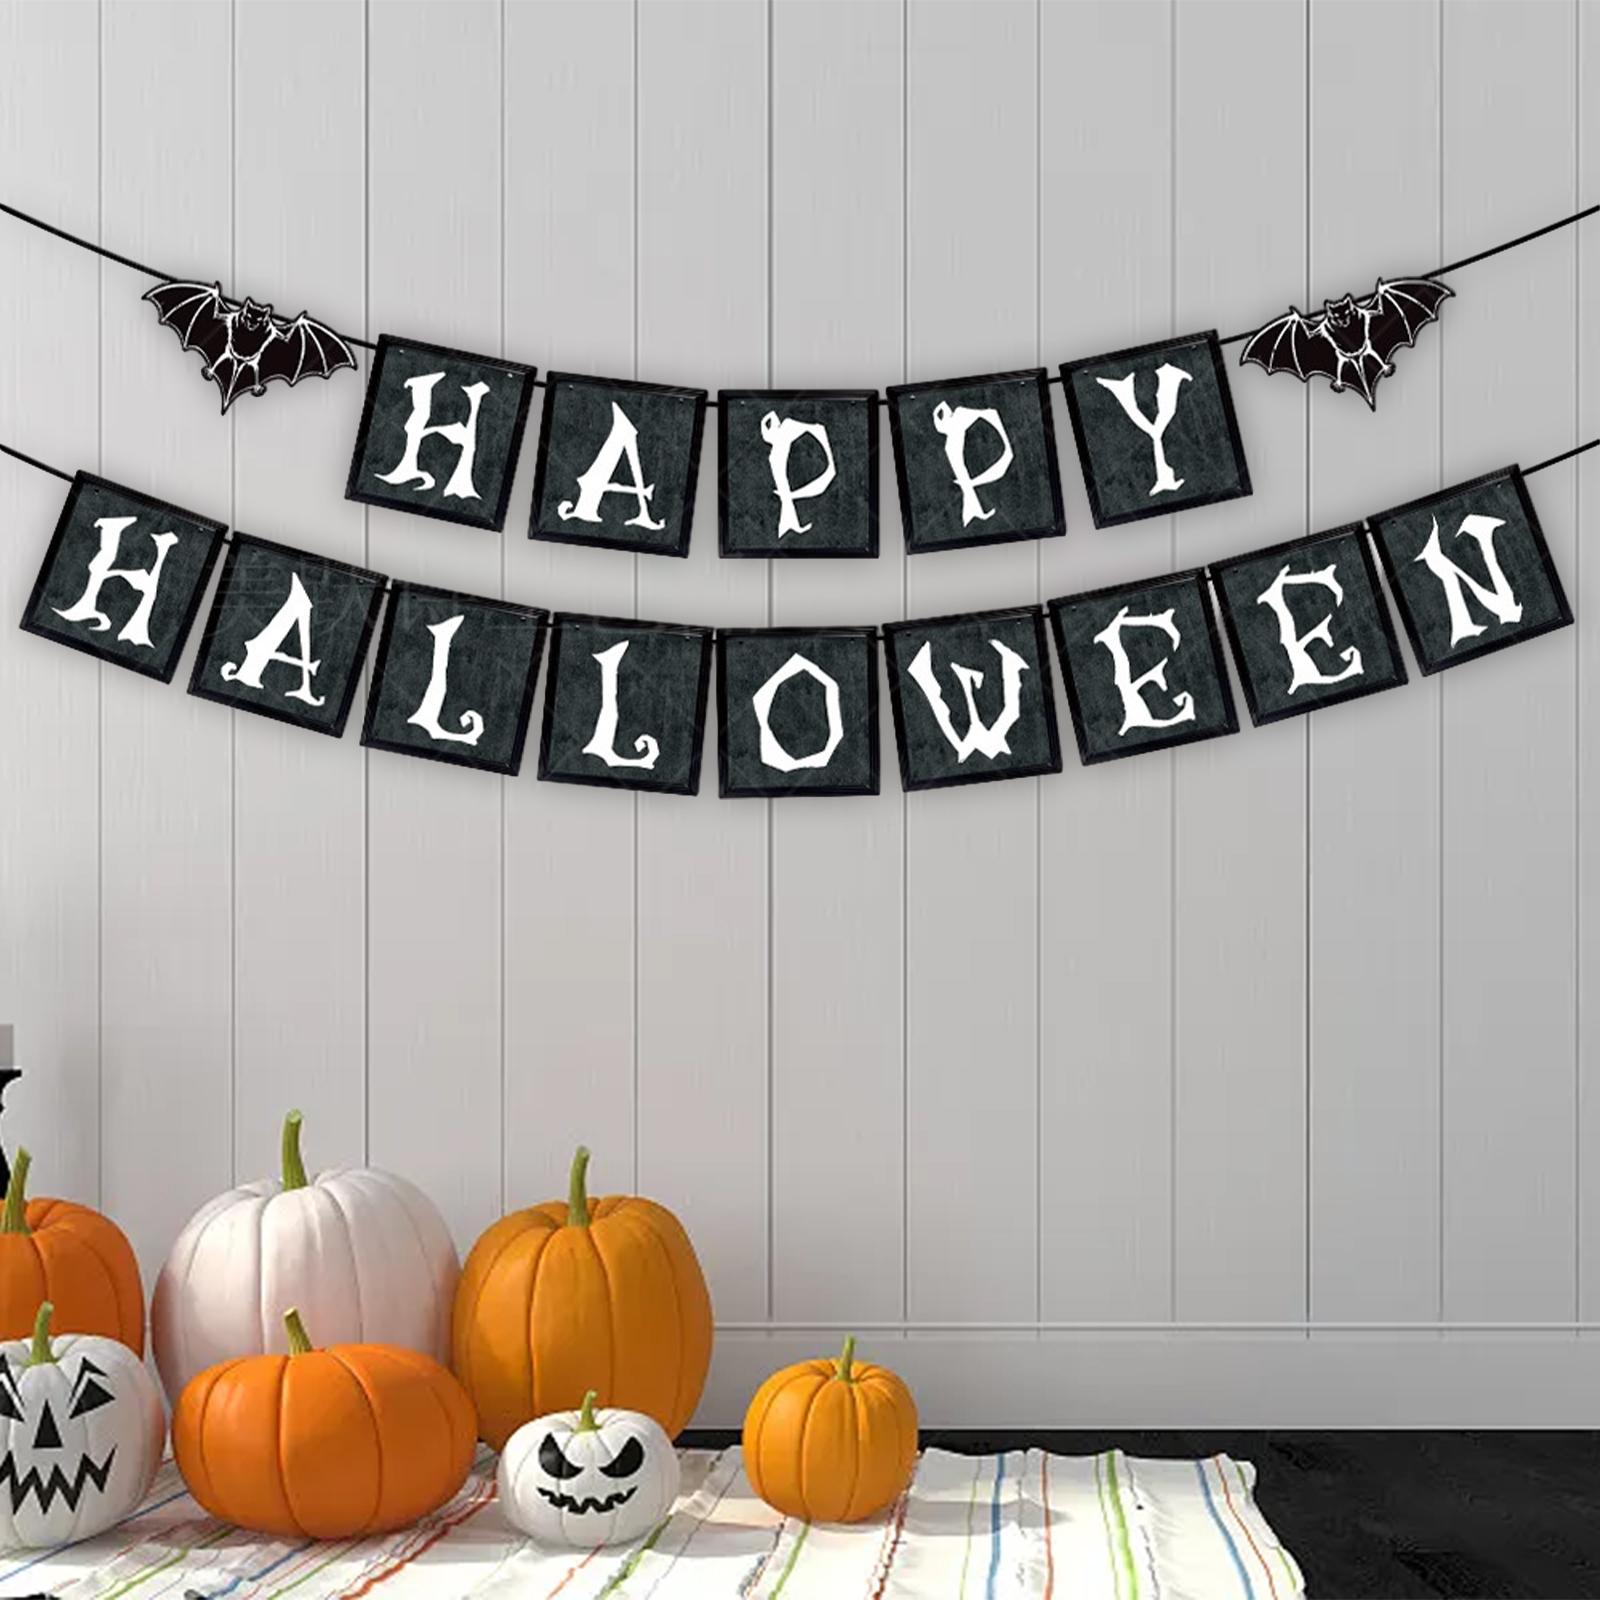 Halloween Banner Fireplace Wall for Horror Movie Theme Party Festivals Clubs Letters